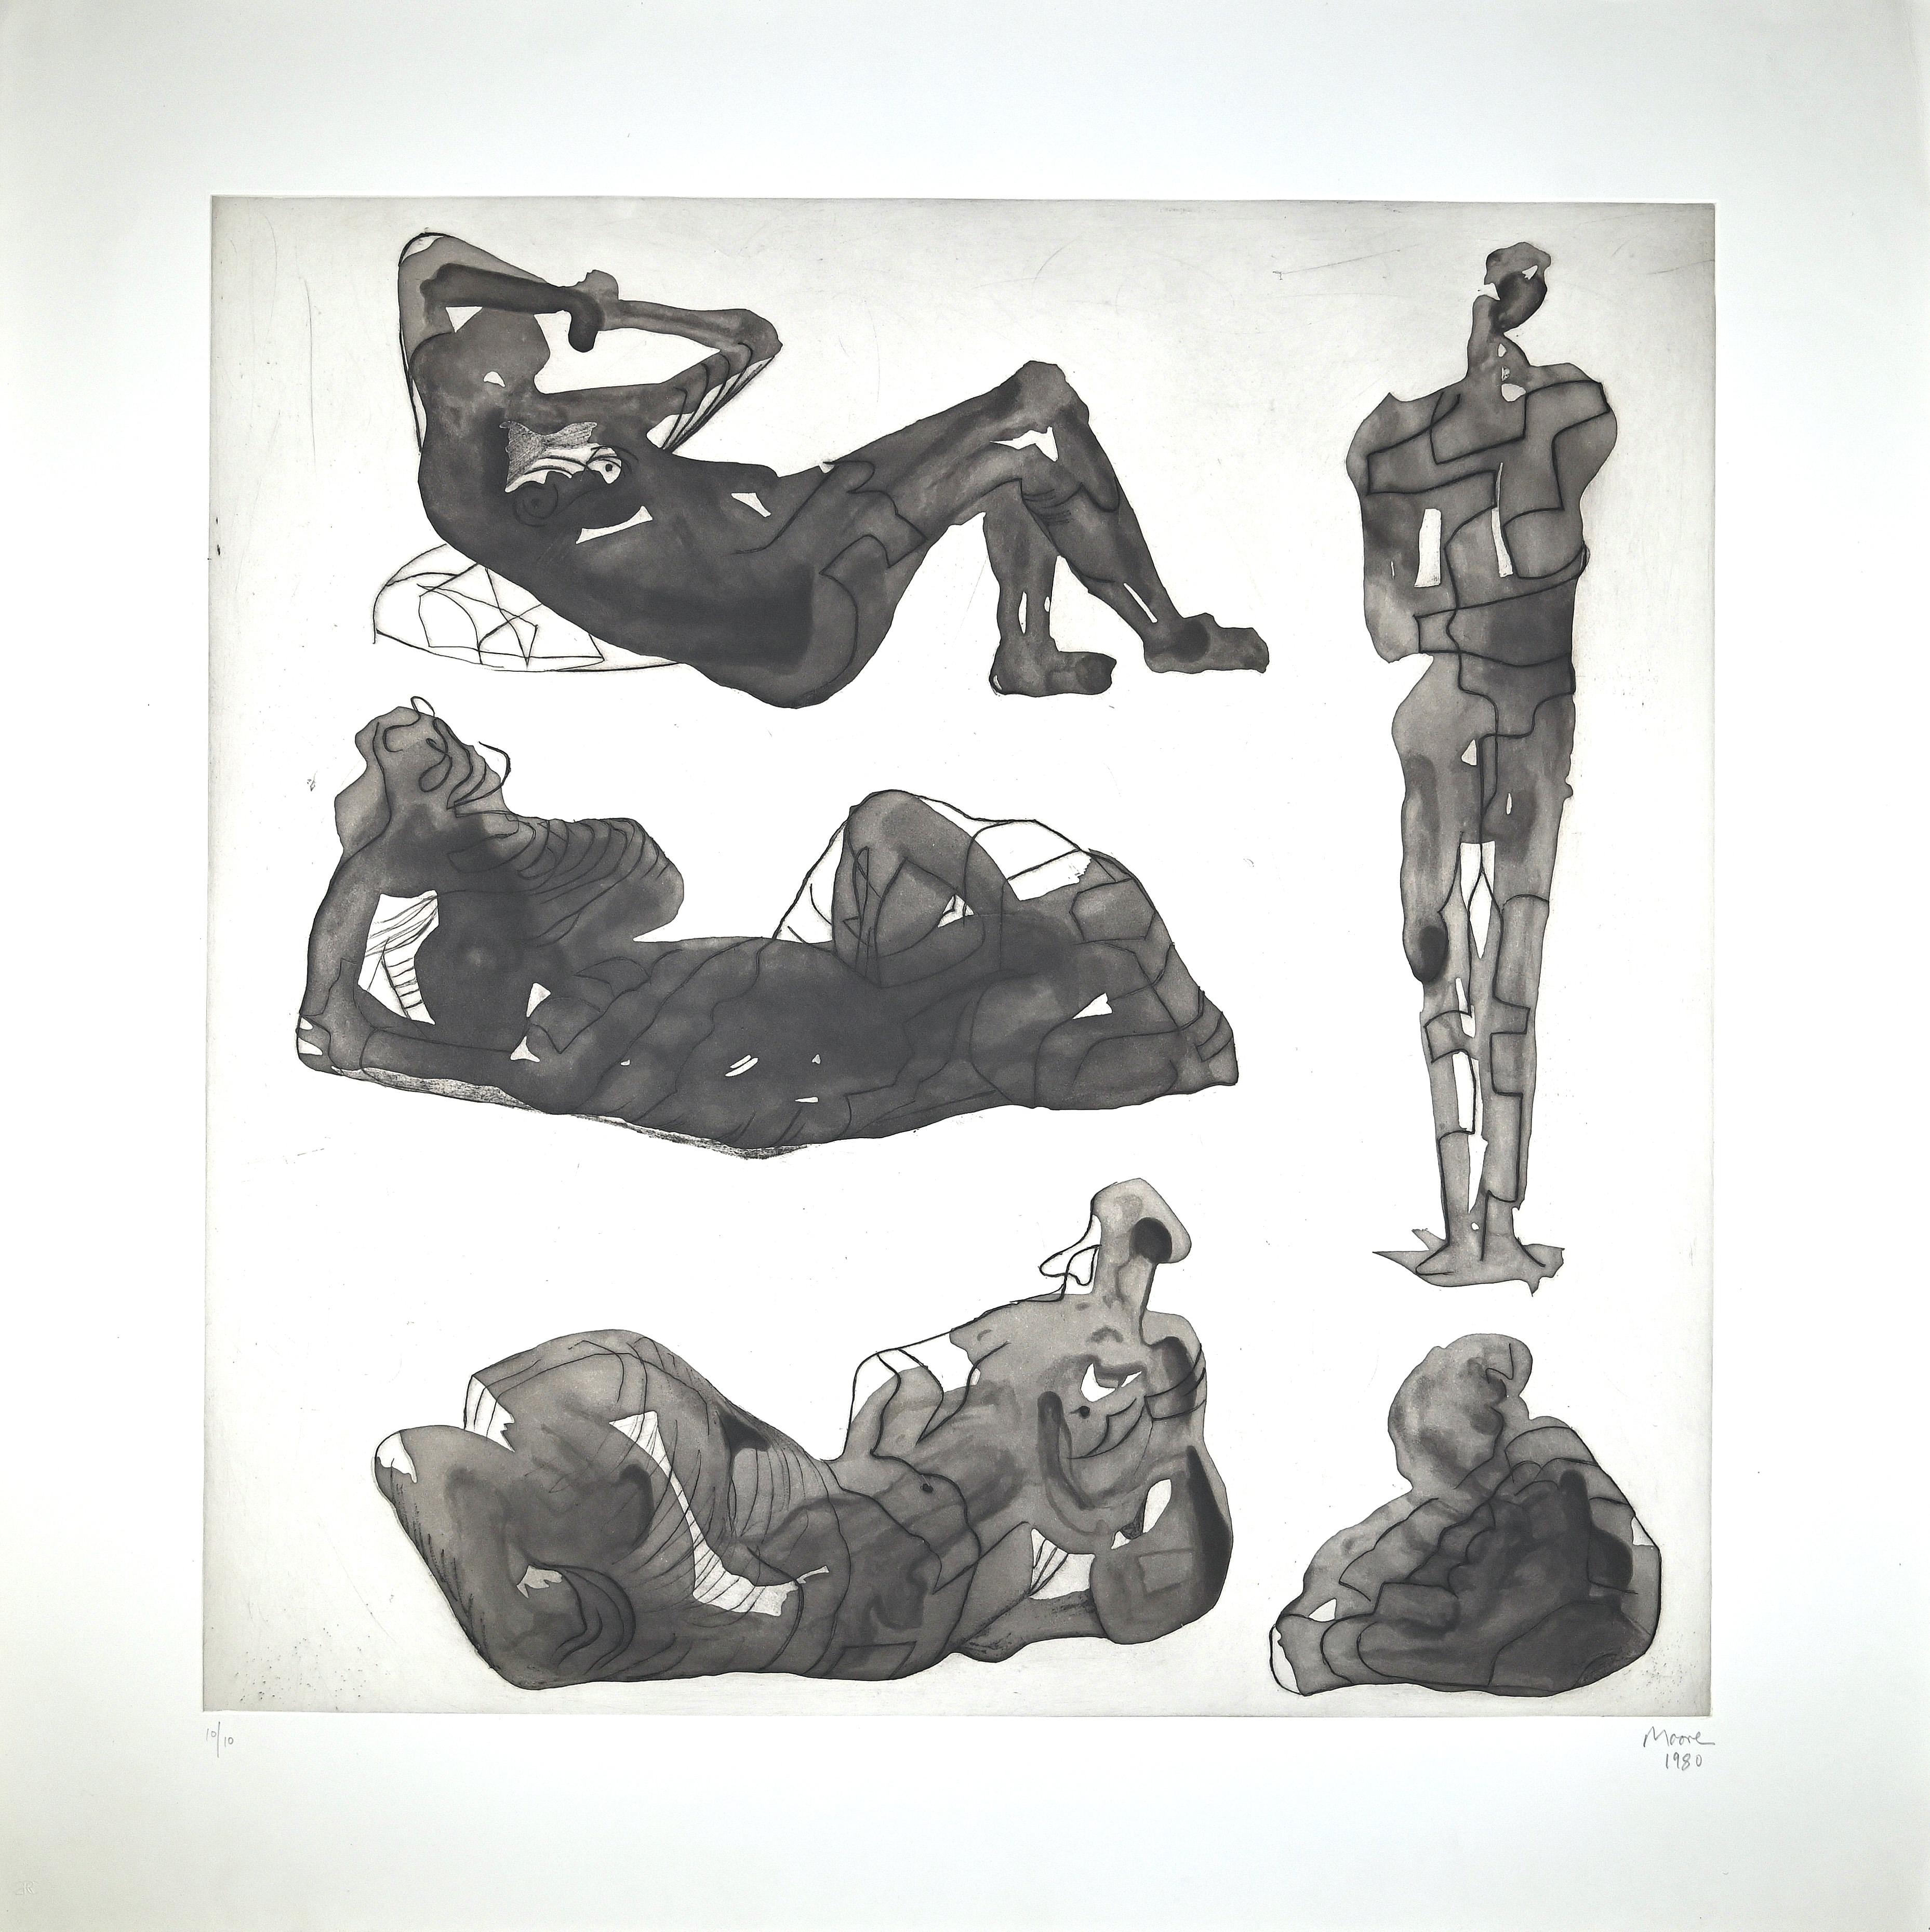 Five sculptural ideas is an original contemporary artwork realized by the British artist Henry Moore (Castleford, 1898 - Much Hadham, 1986).

Original Aquatint and Etching on copper plate printed in 1 color. Image Dimensions: 73.5 x 73.5